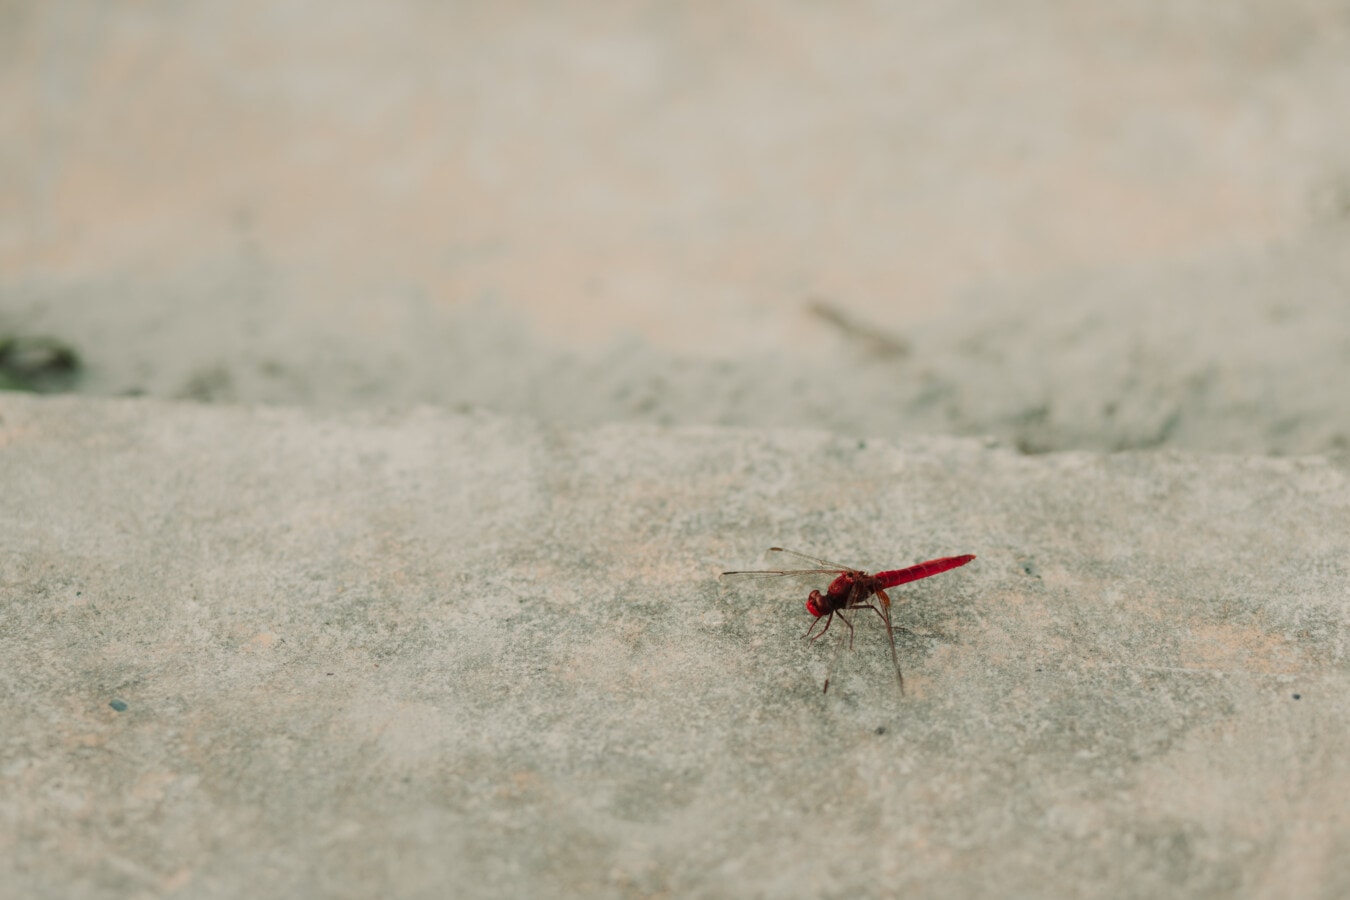 dragonfly, dark red, small, insect, nature, arthropod, outdoors, wildlife, animal, ground